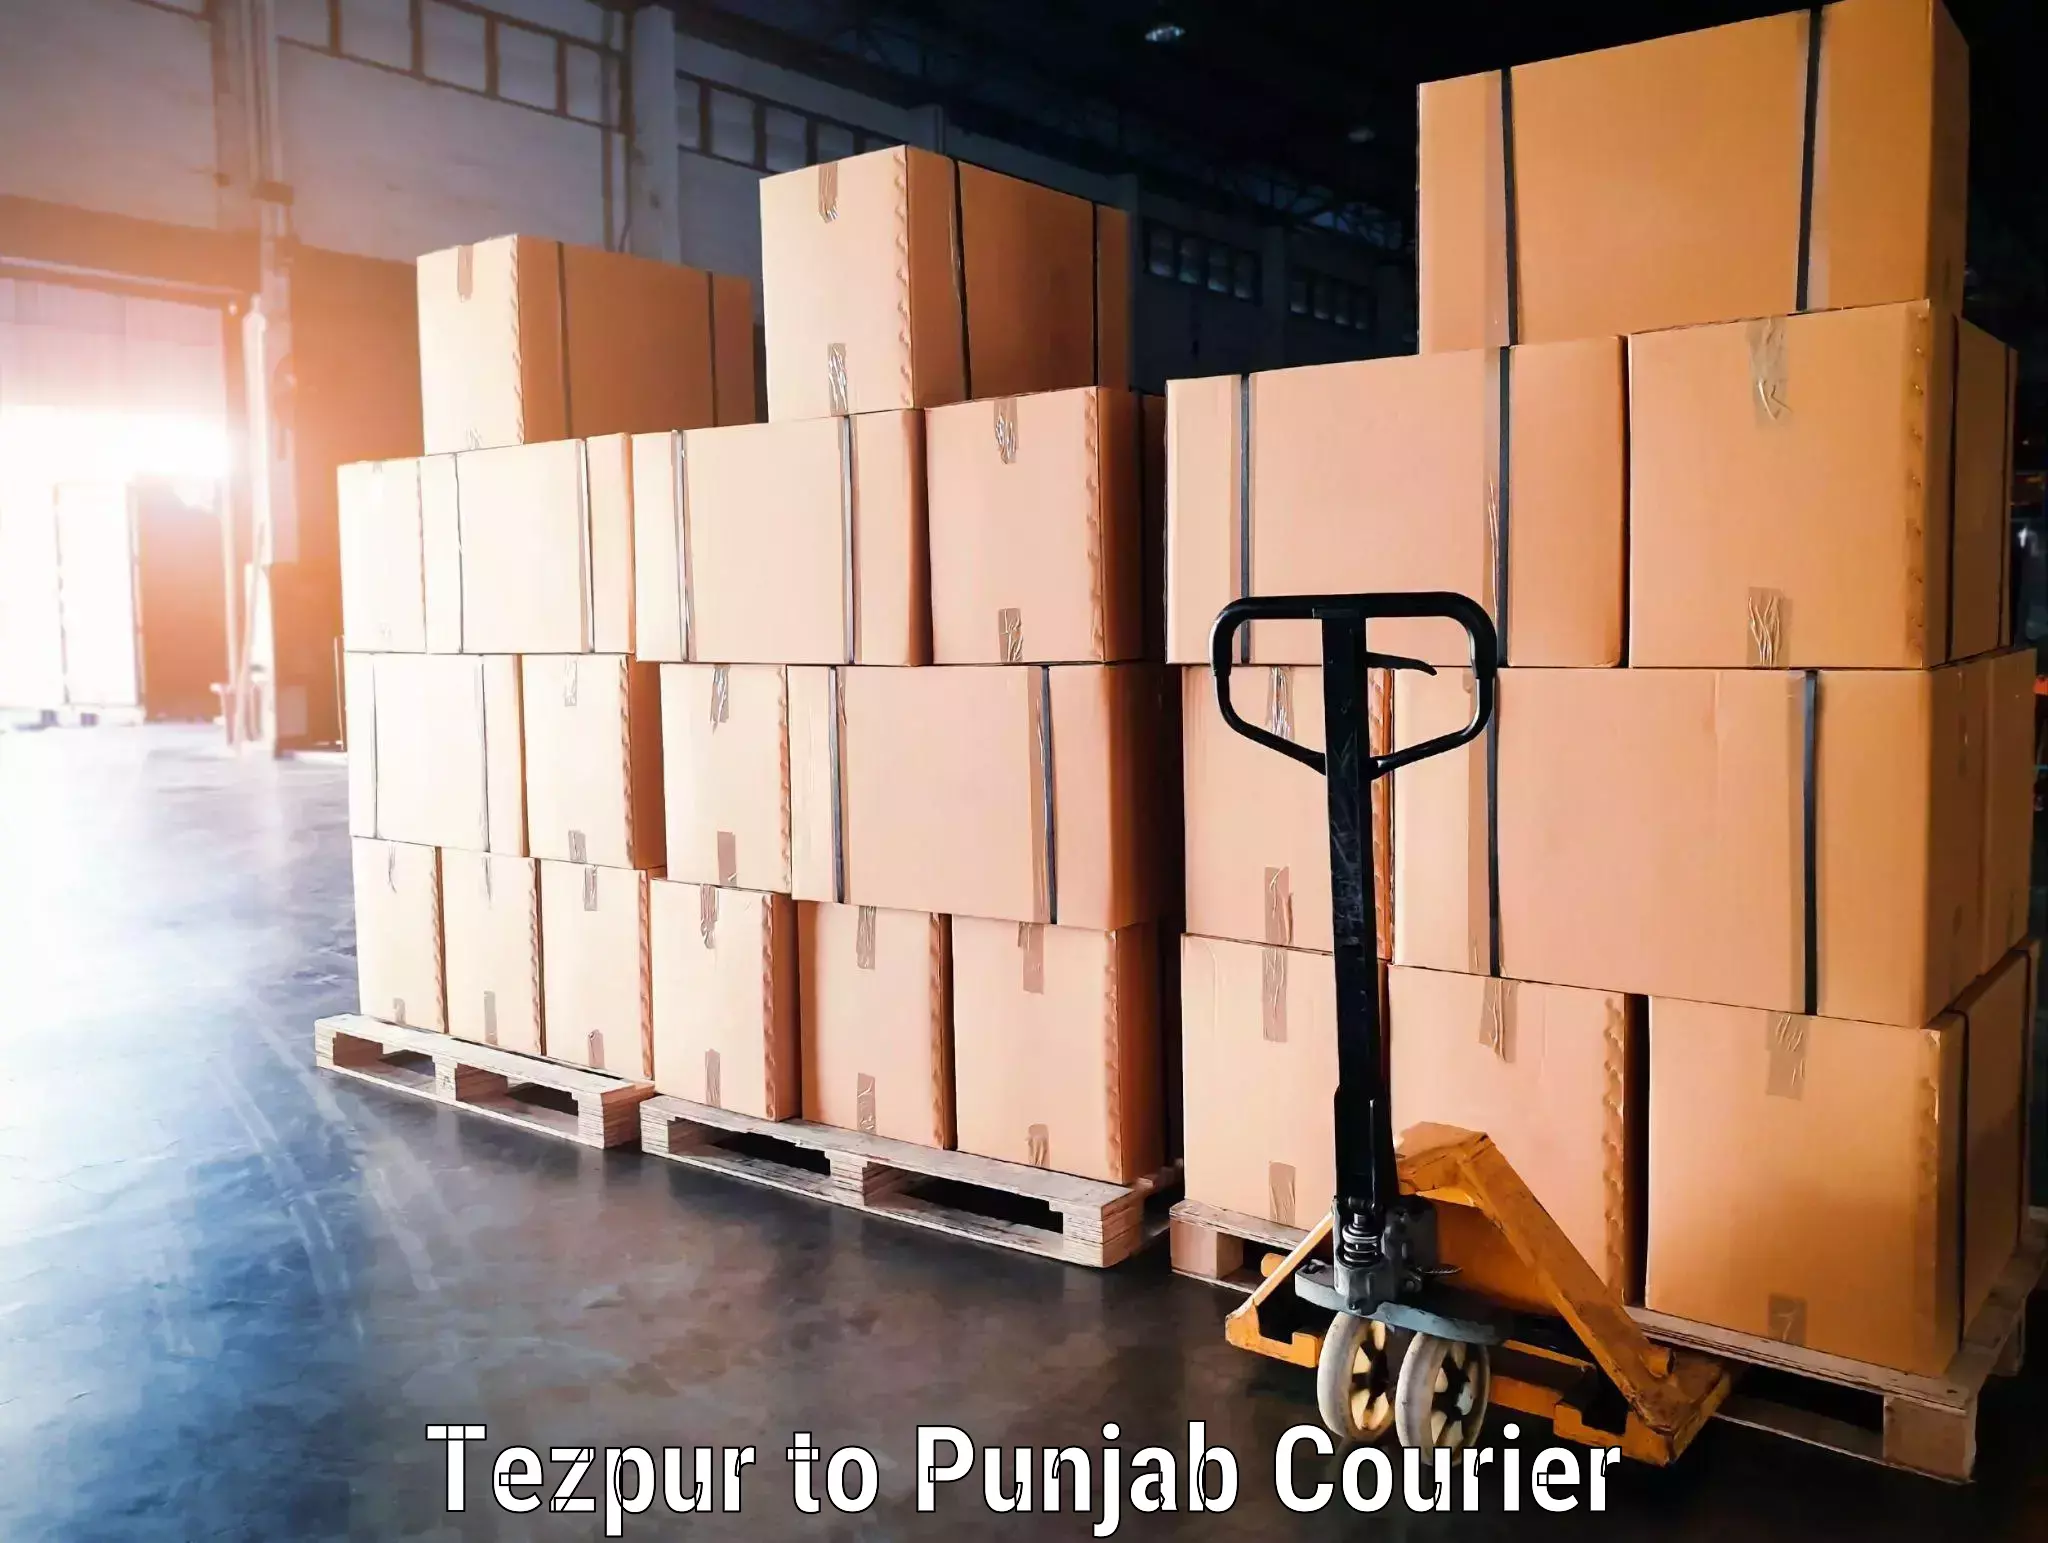 Luggage transport consultancy Tezpur to Amritsar